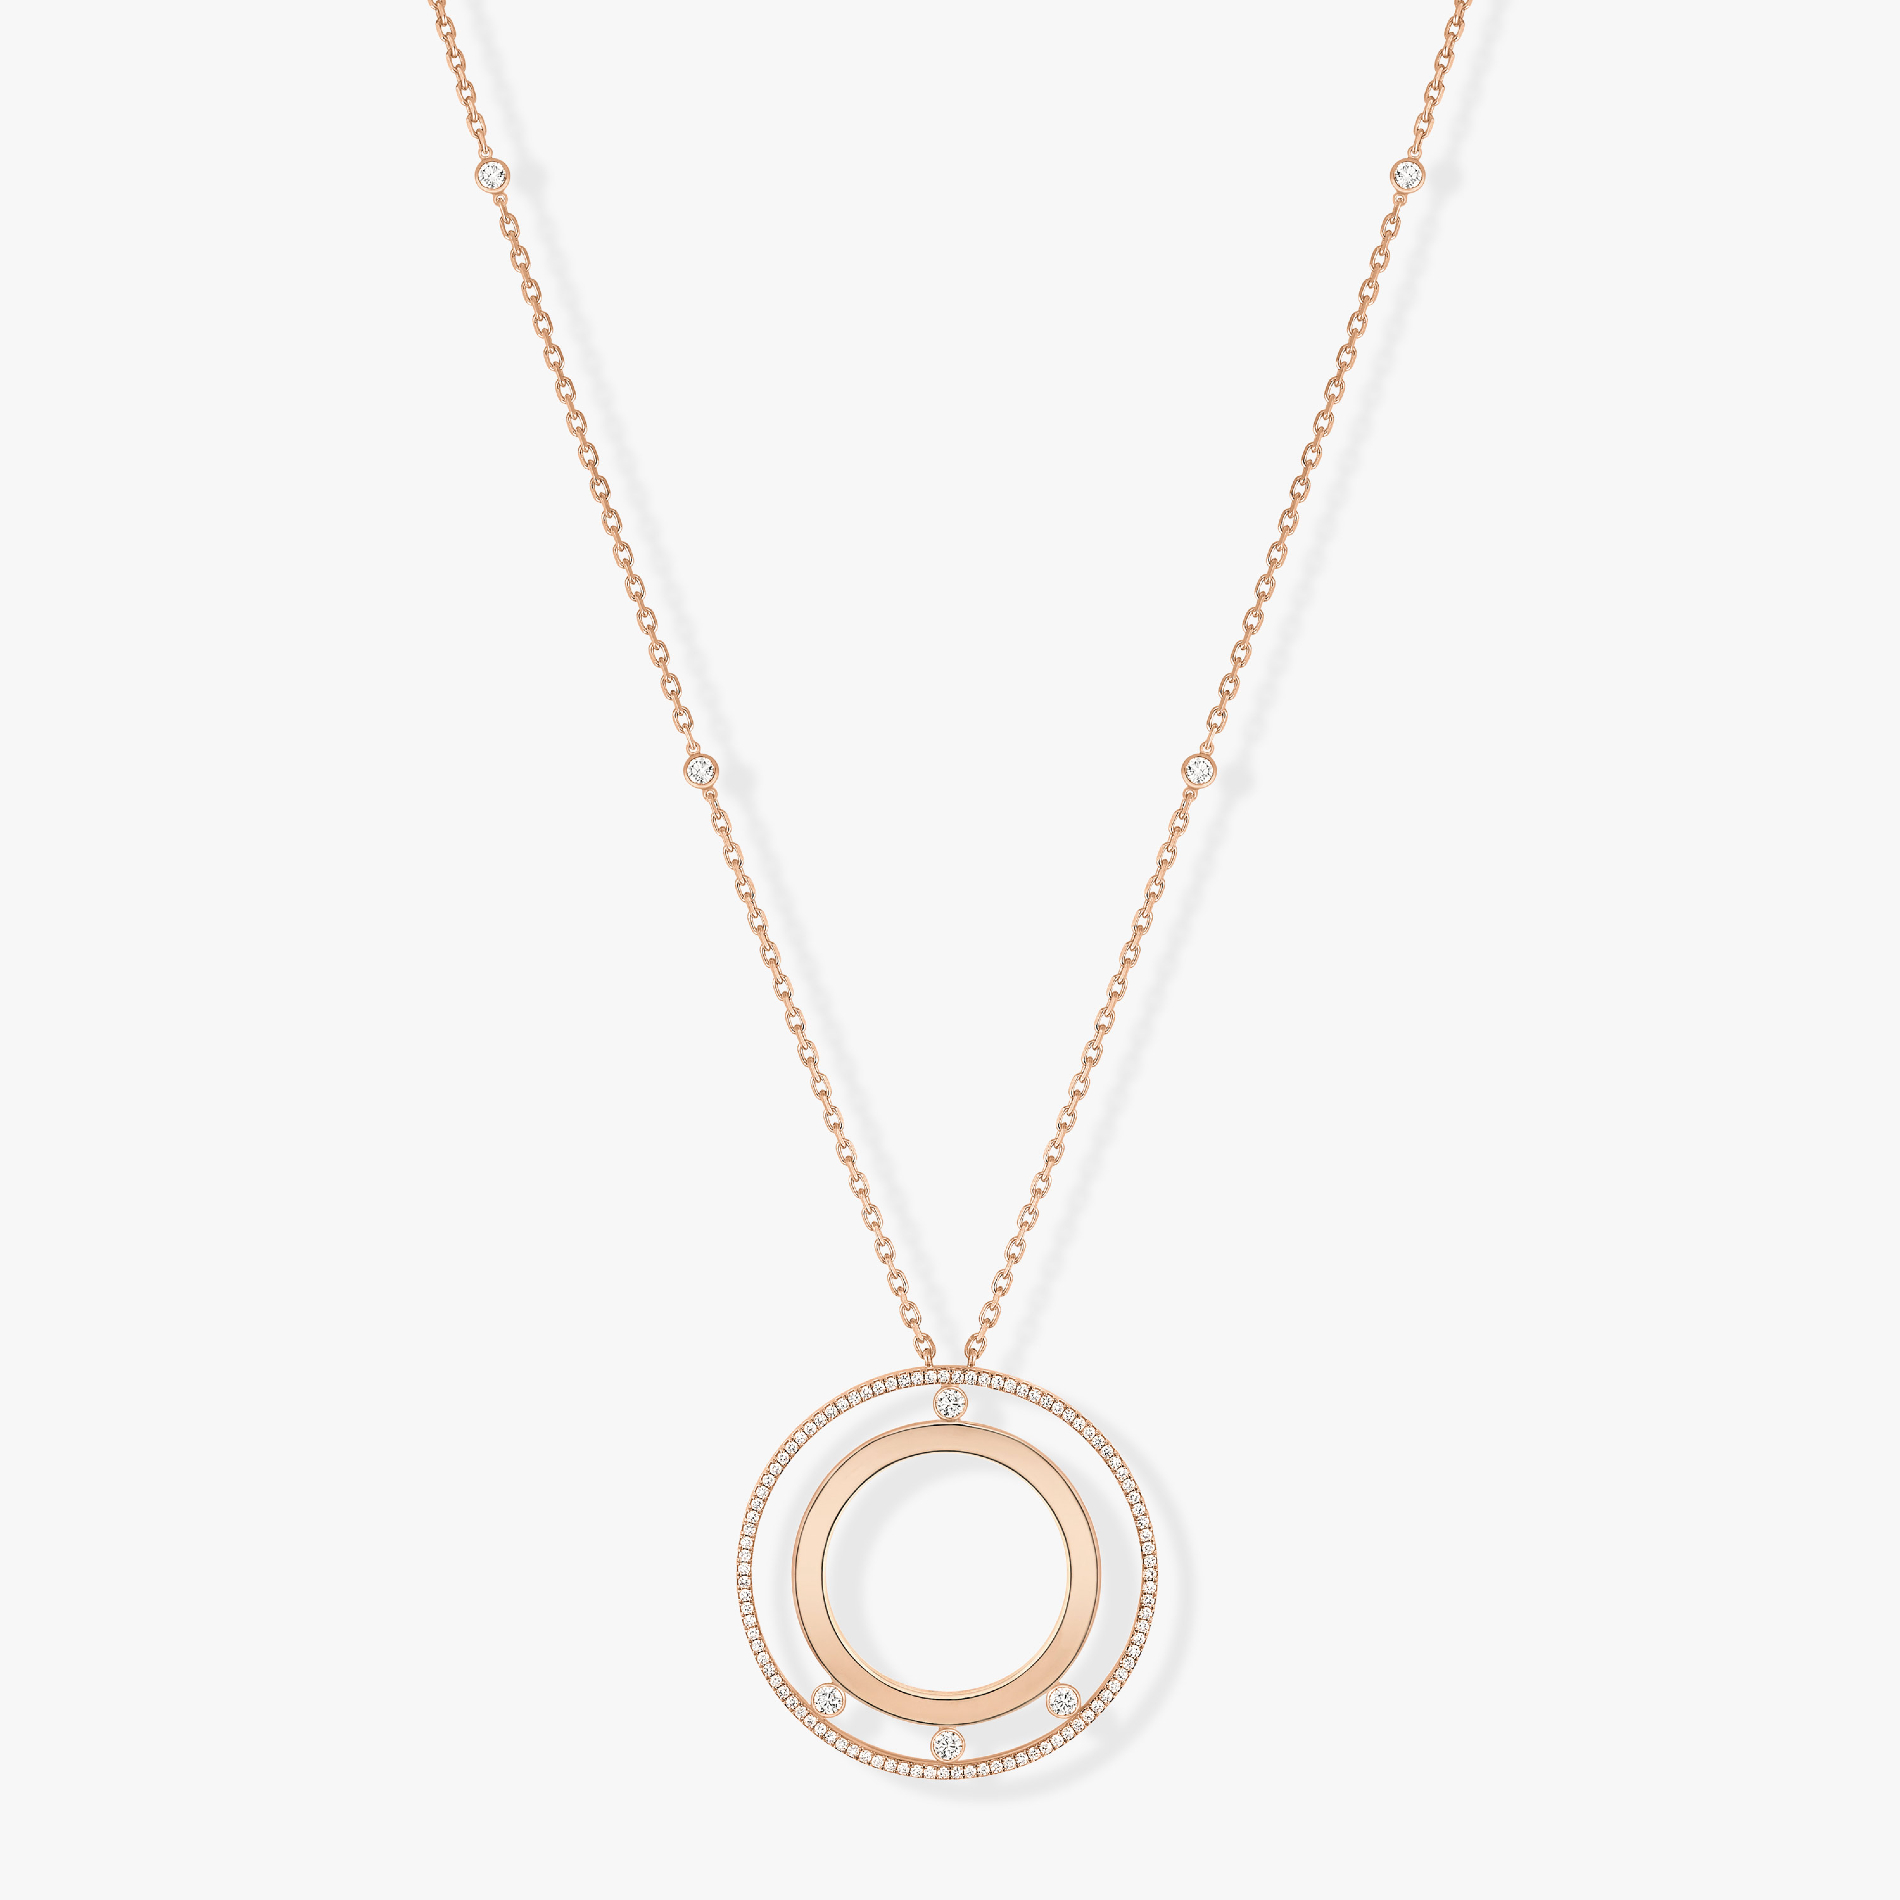 Move Romane Long Necklace Pink Gold For Her Diamond Necklace 11169-PG